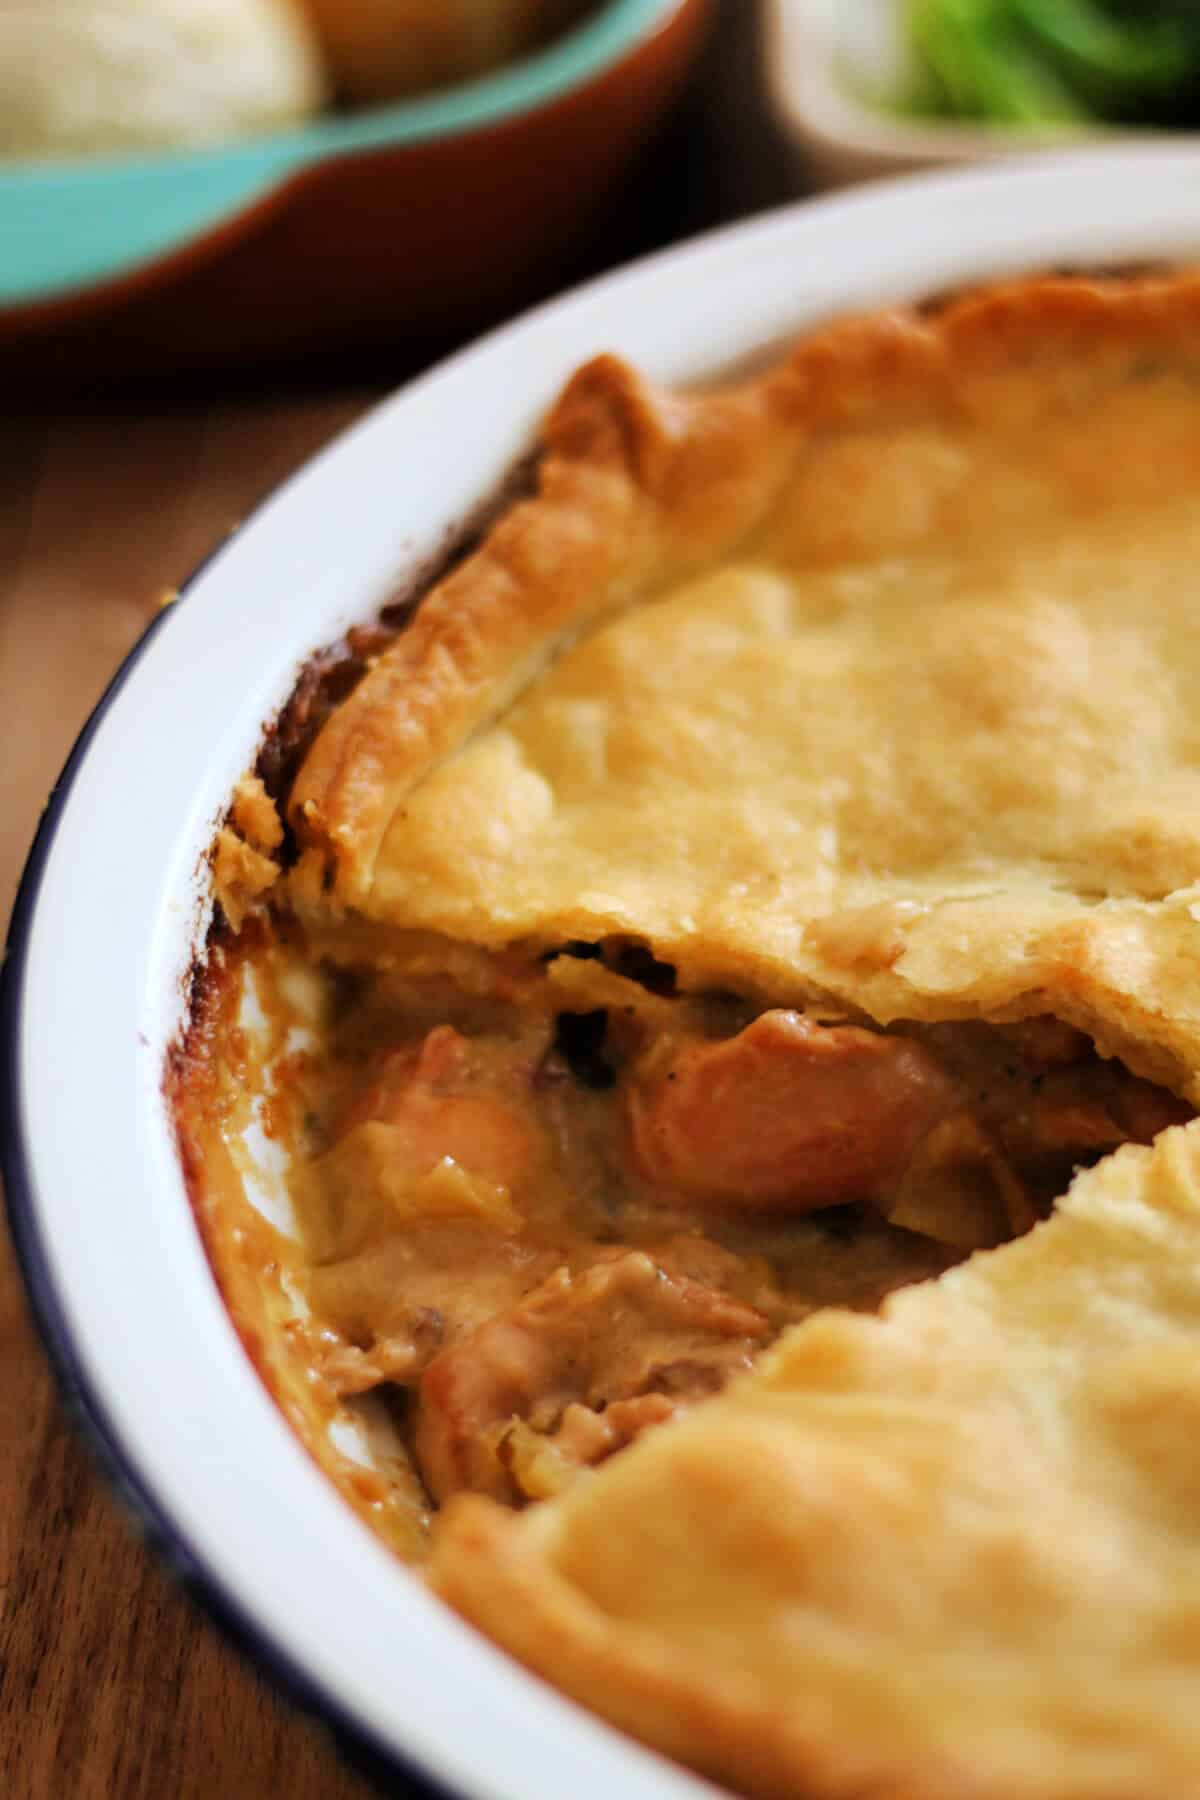 Chicken pie in a white dish, with a slice removed showing the filing.